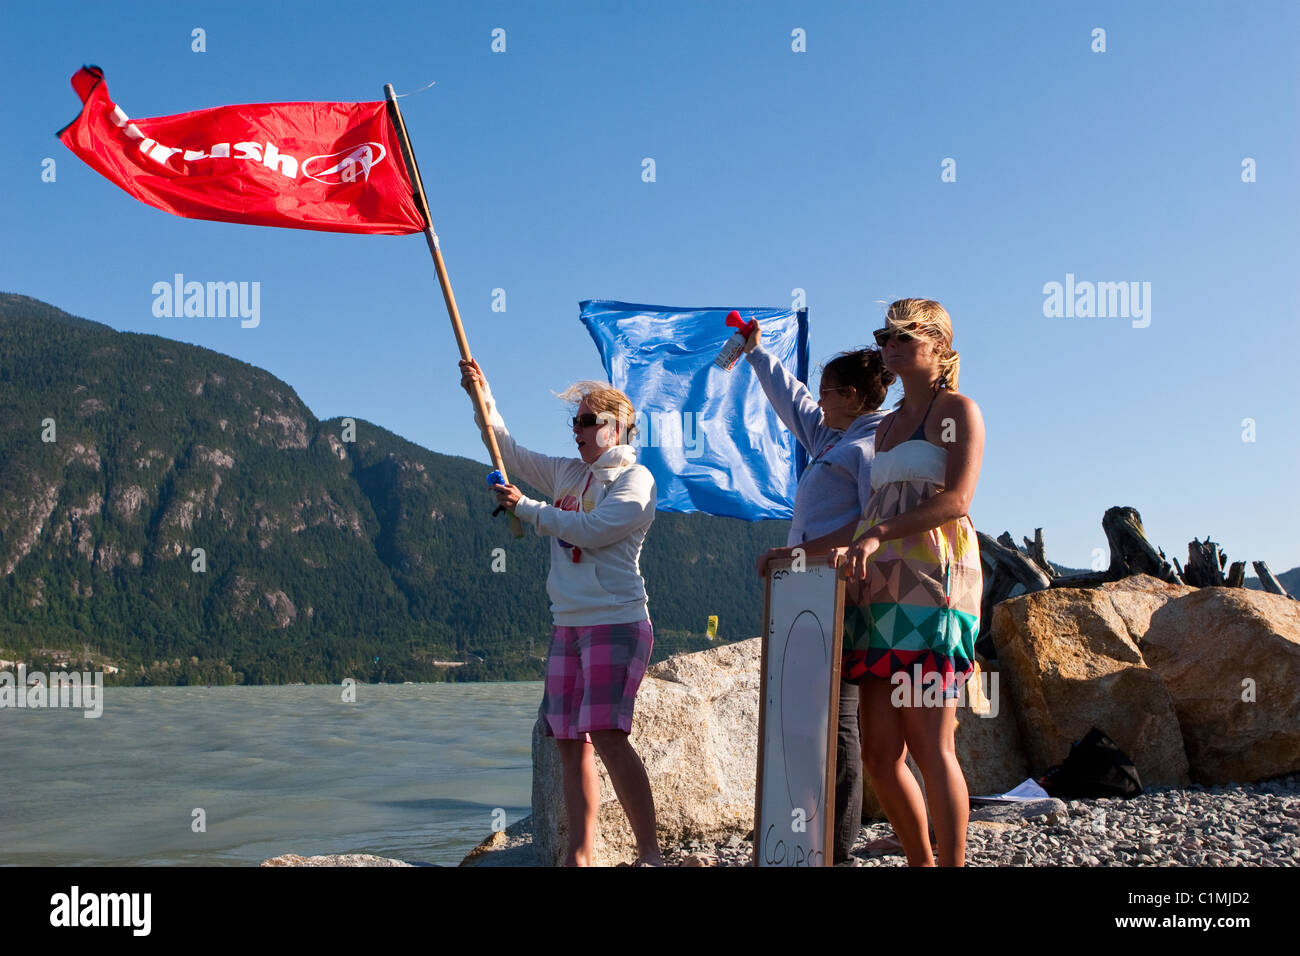 The red flag indicates the start of a kiteboard race. Stock Photo